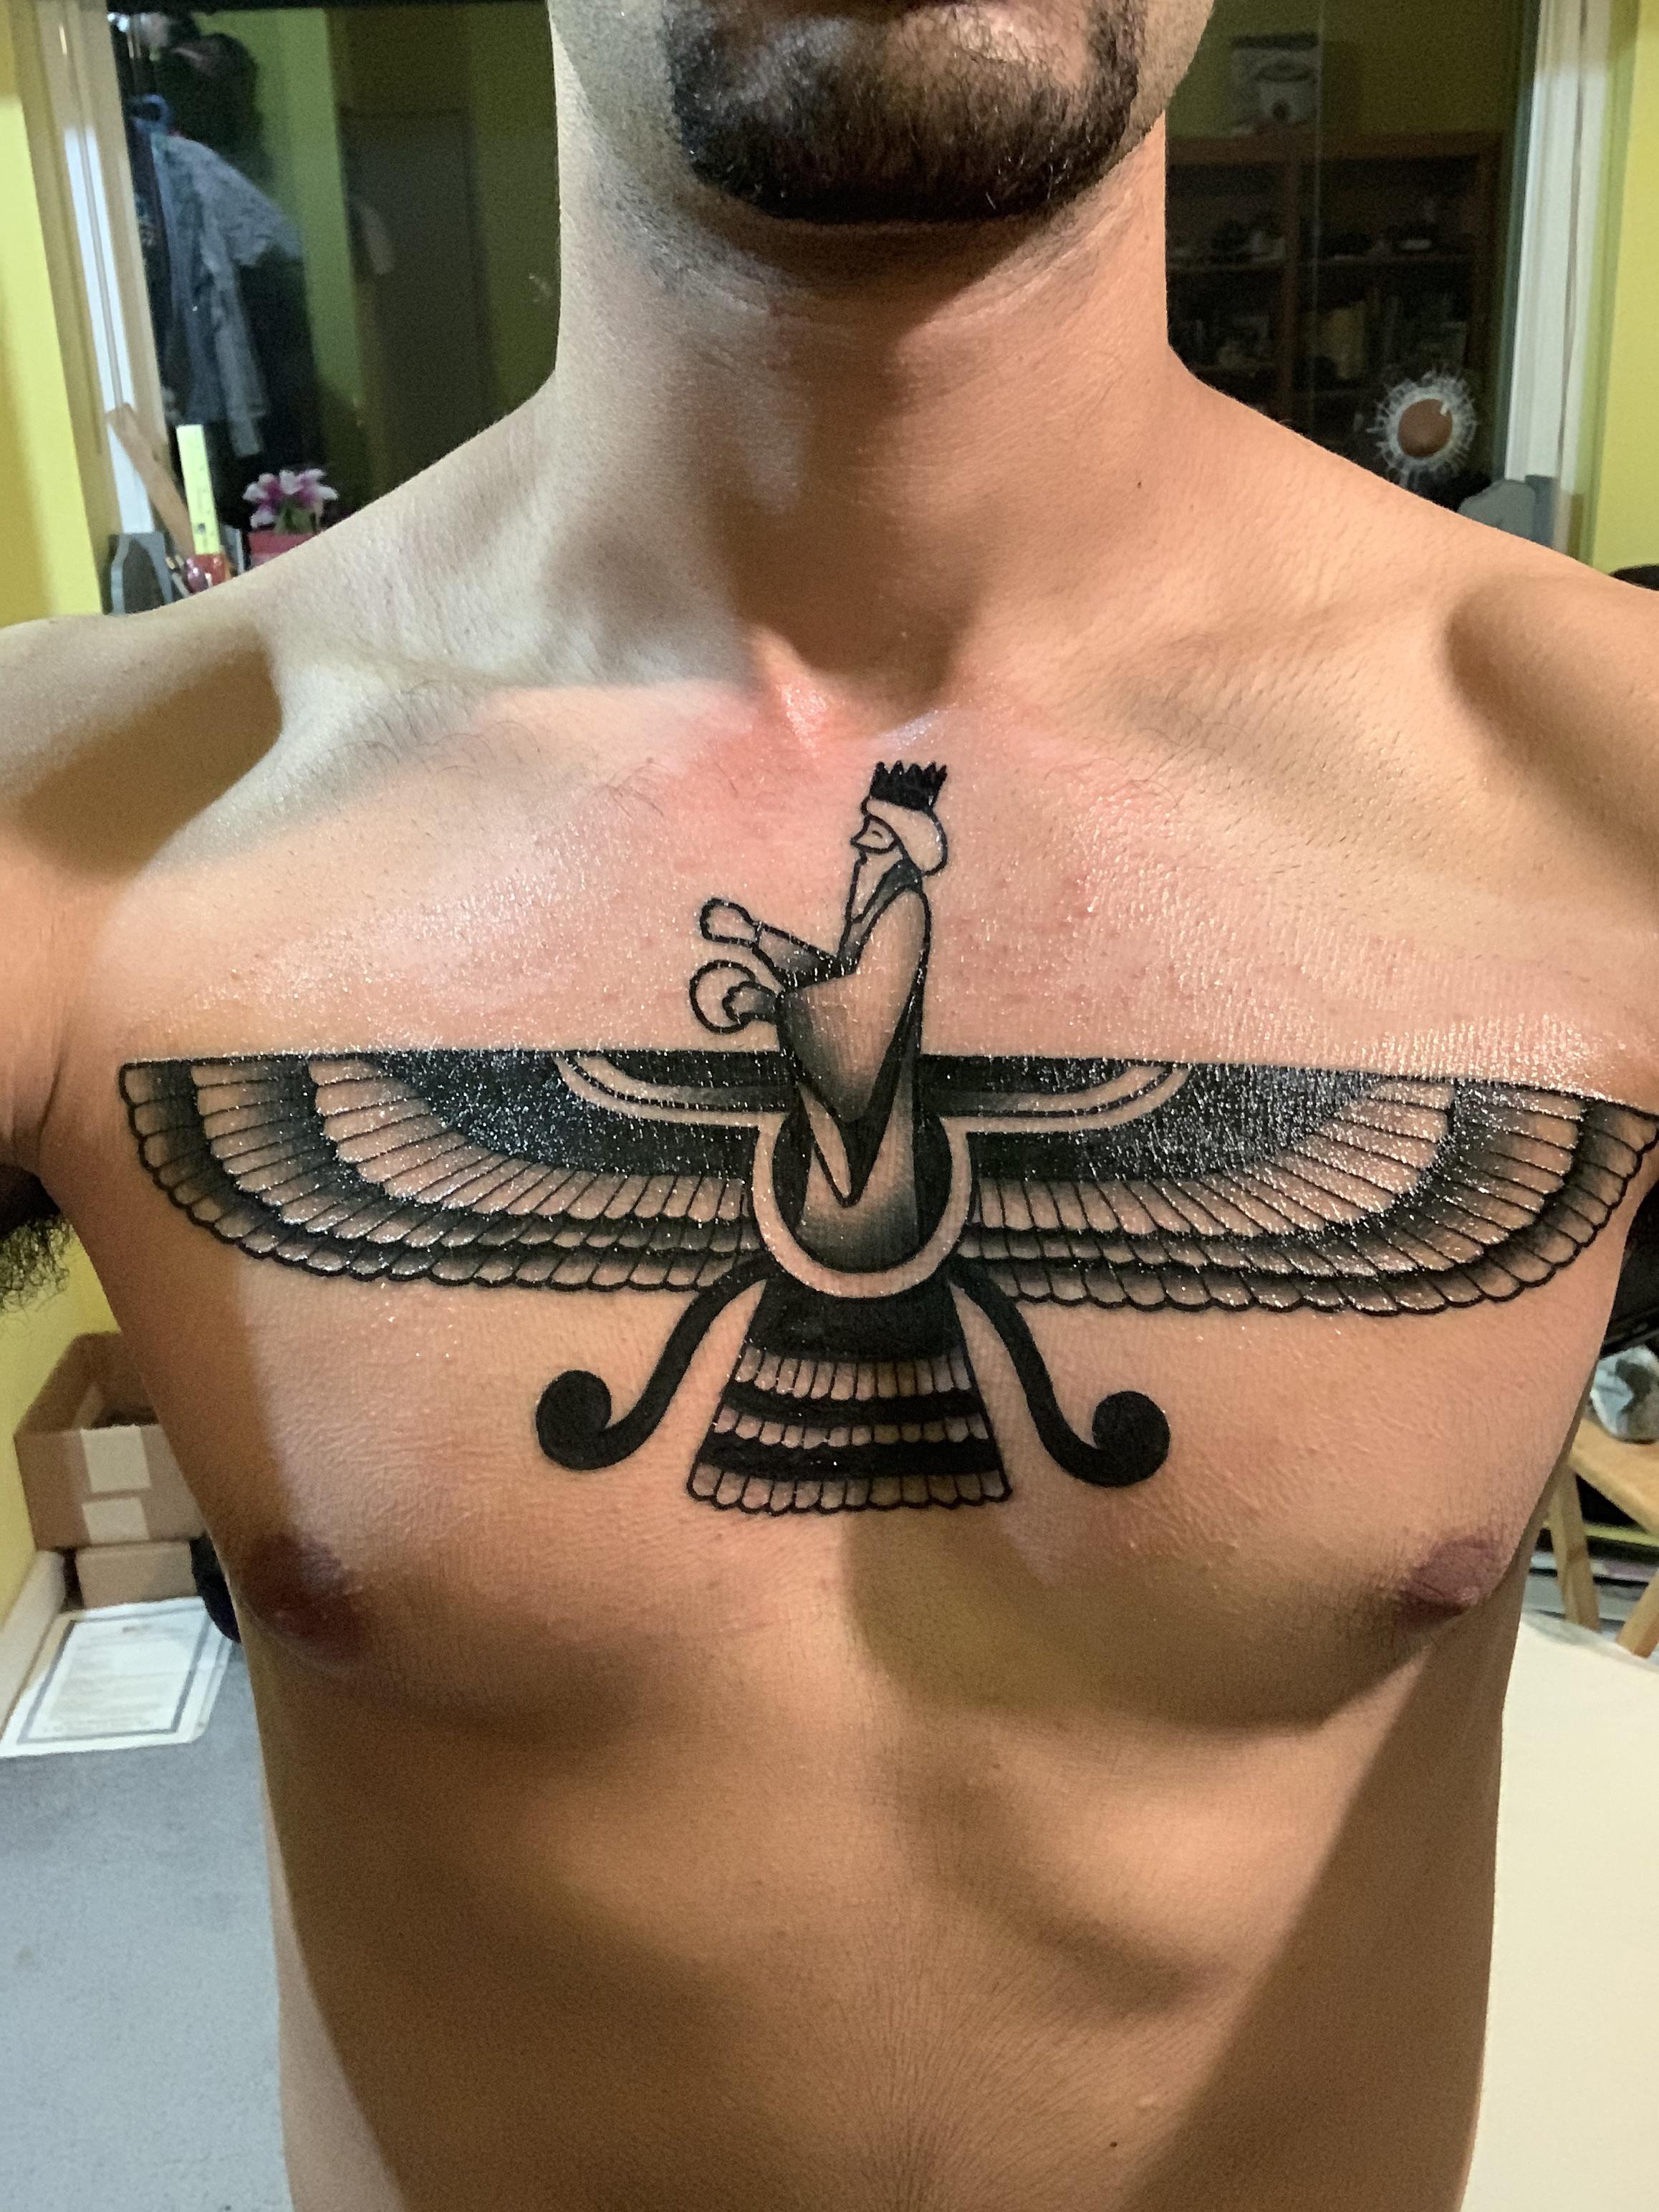 Who else has any tattoos for our people?